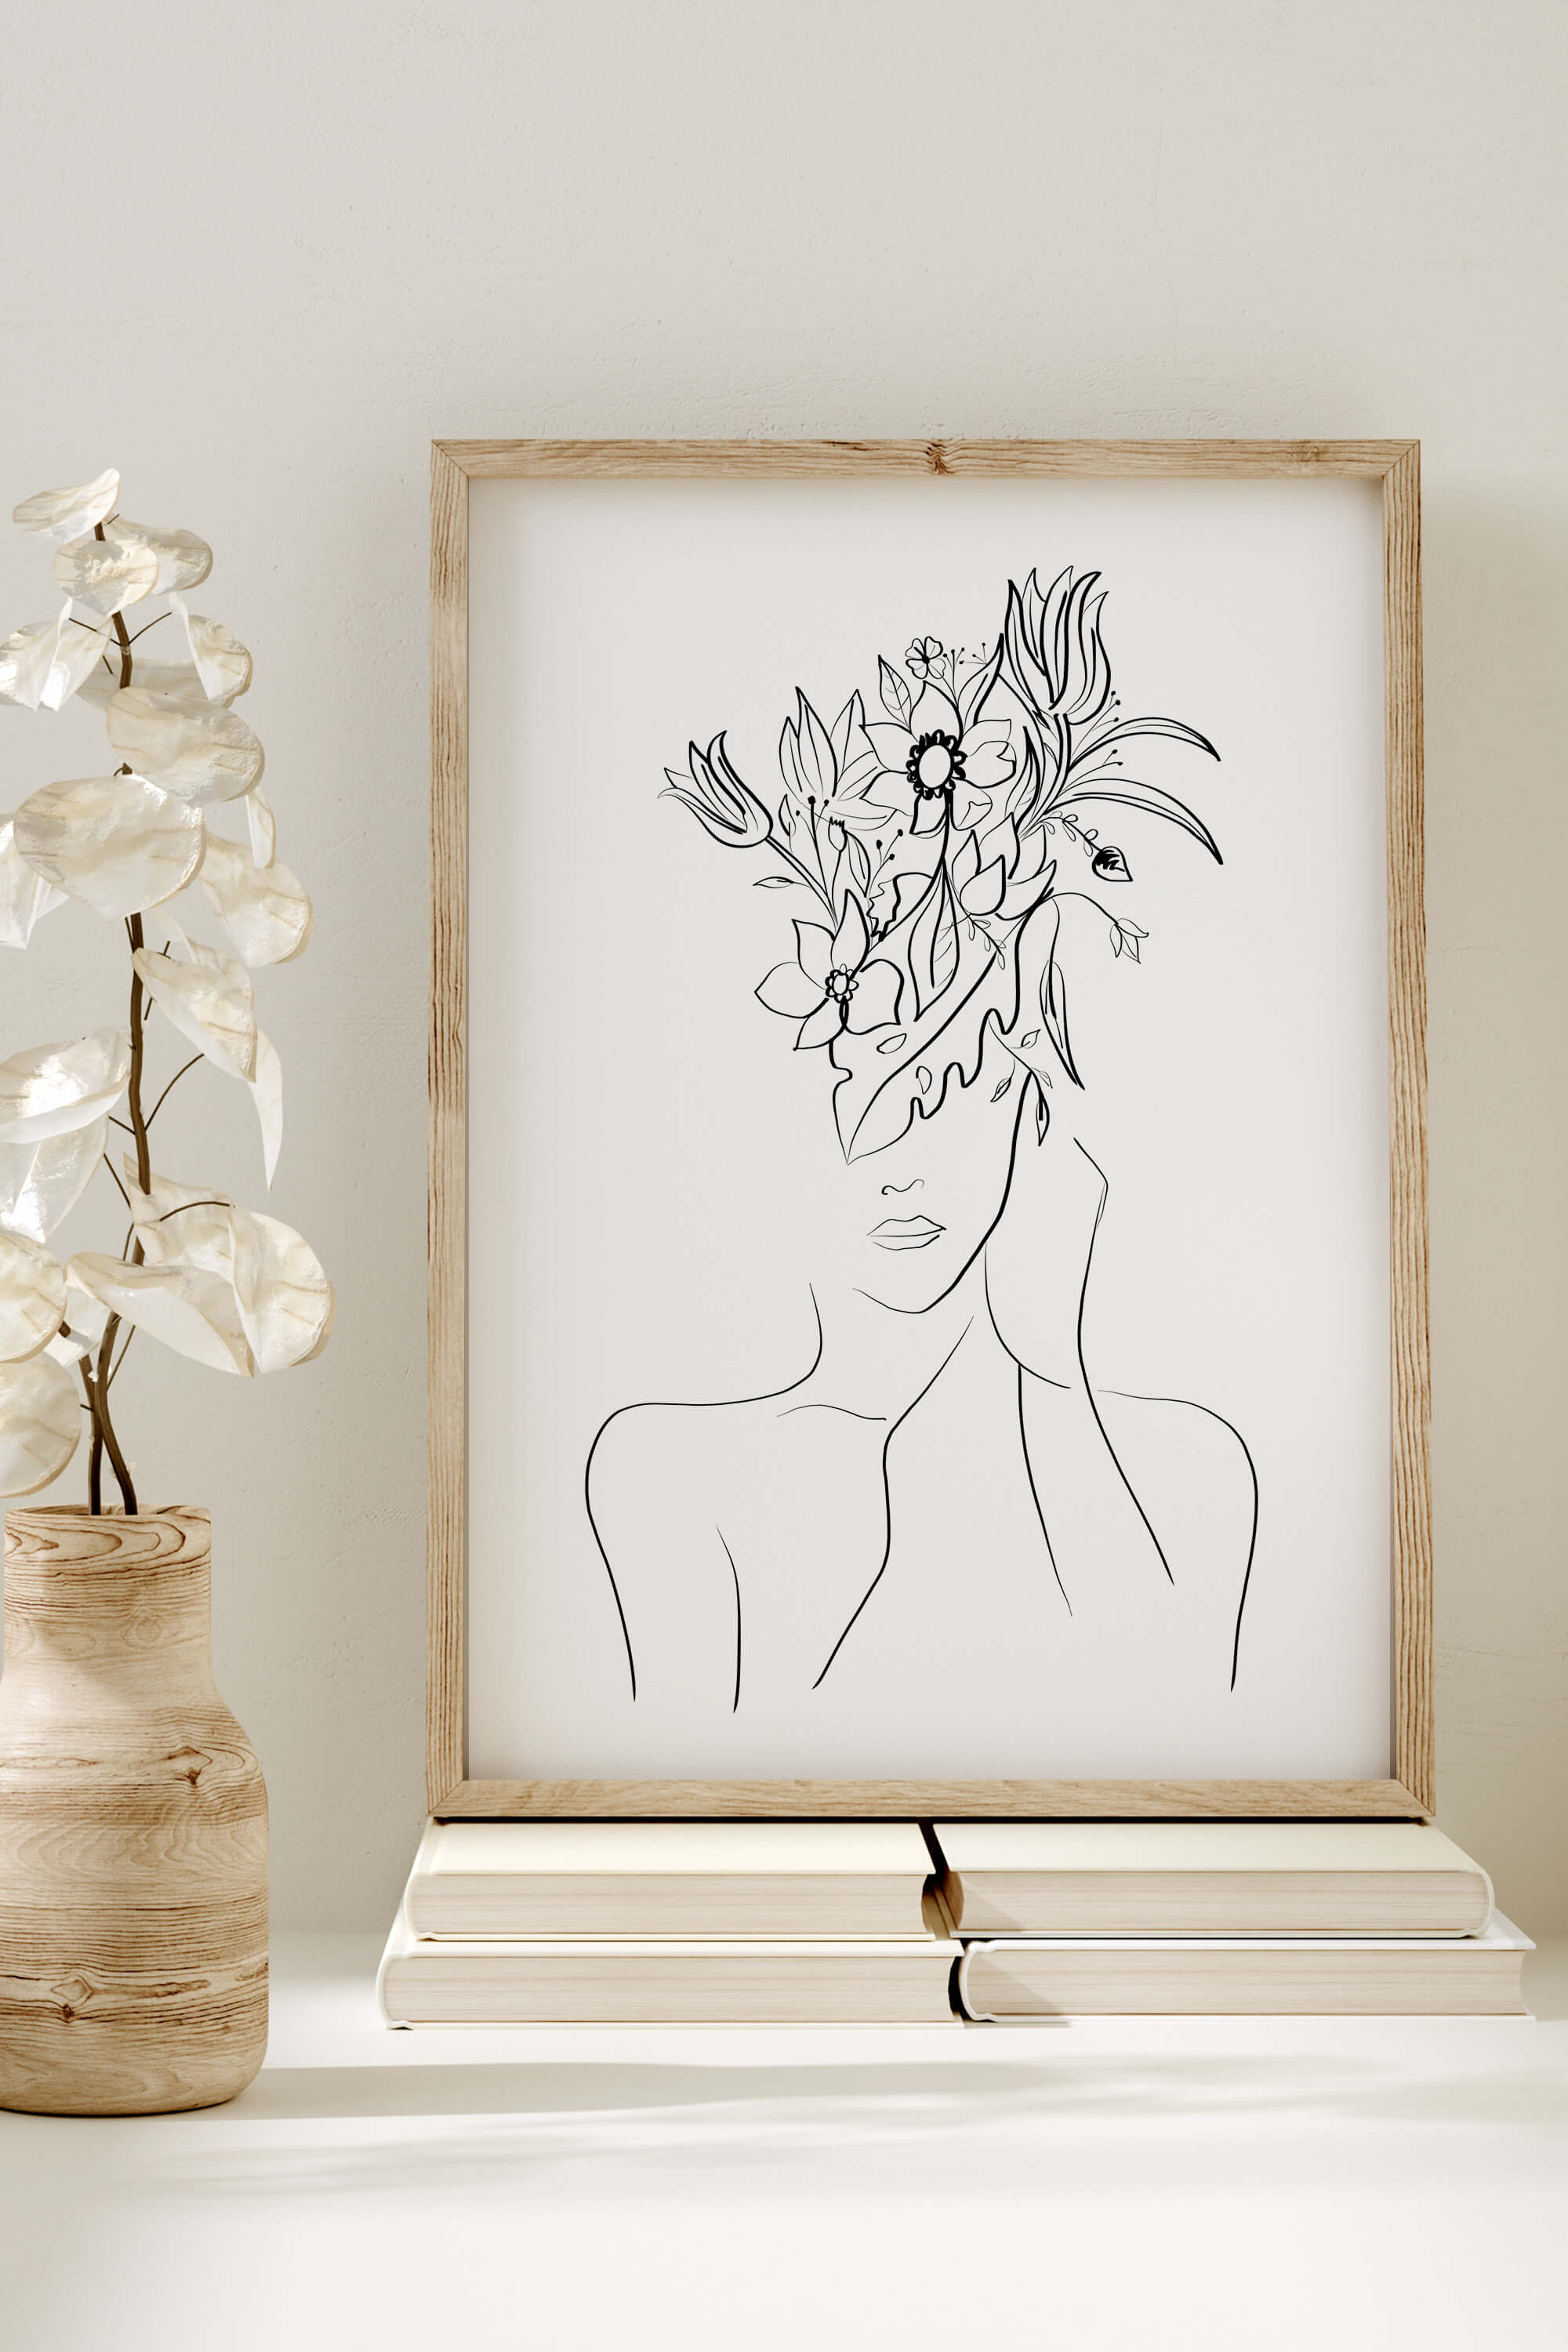 A monochrome art print showcasing a romantic botanical couple. The timeless elegance of this piece makes it a statement for love-themed wall decor. Bring sophistication and romance into your living space.